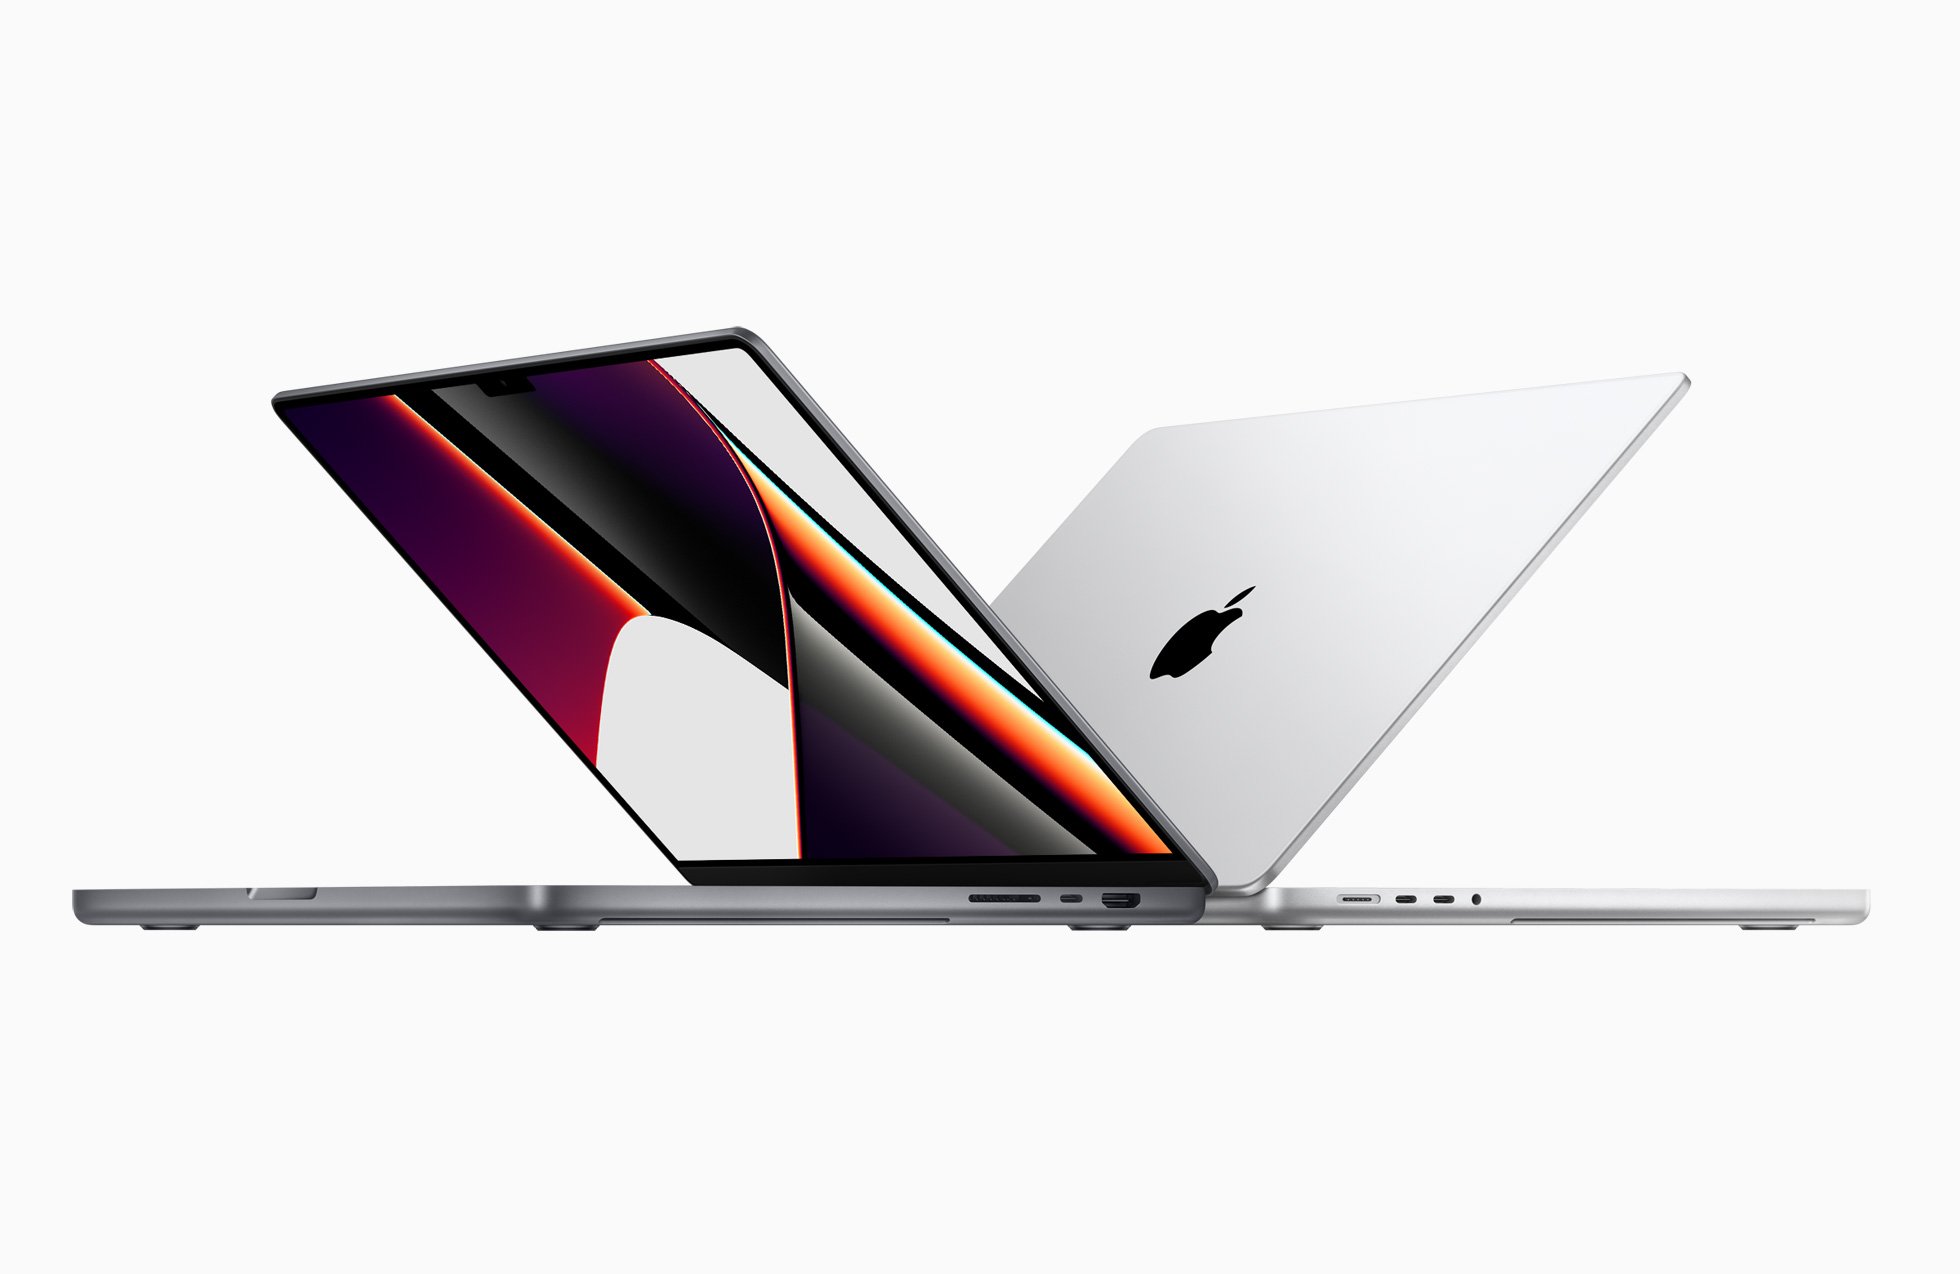 The new MacBook Pro is everything you missed about Apple’s best laptop